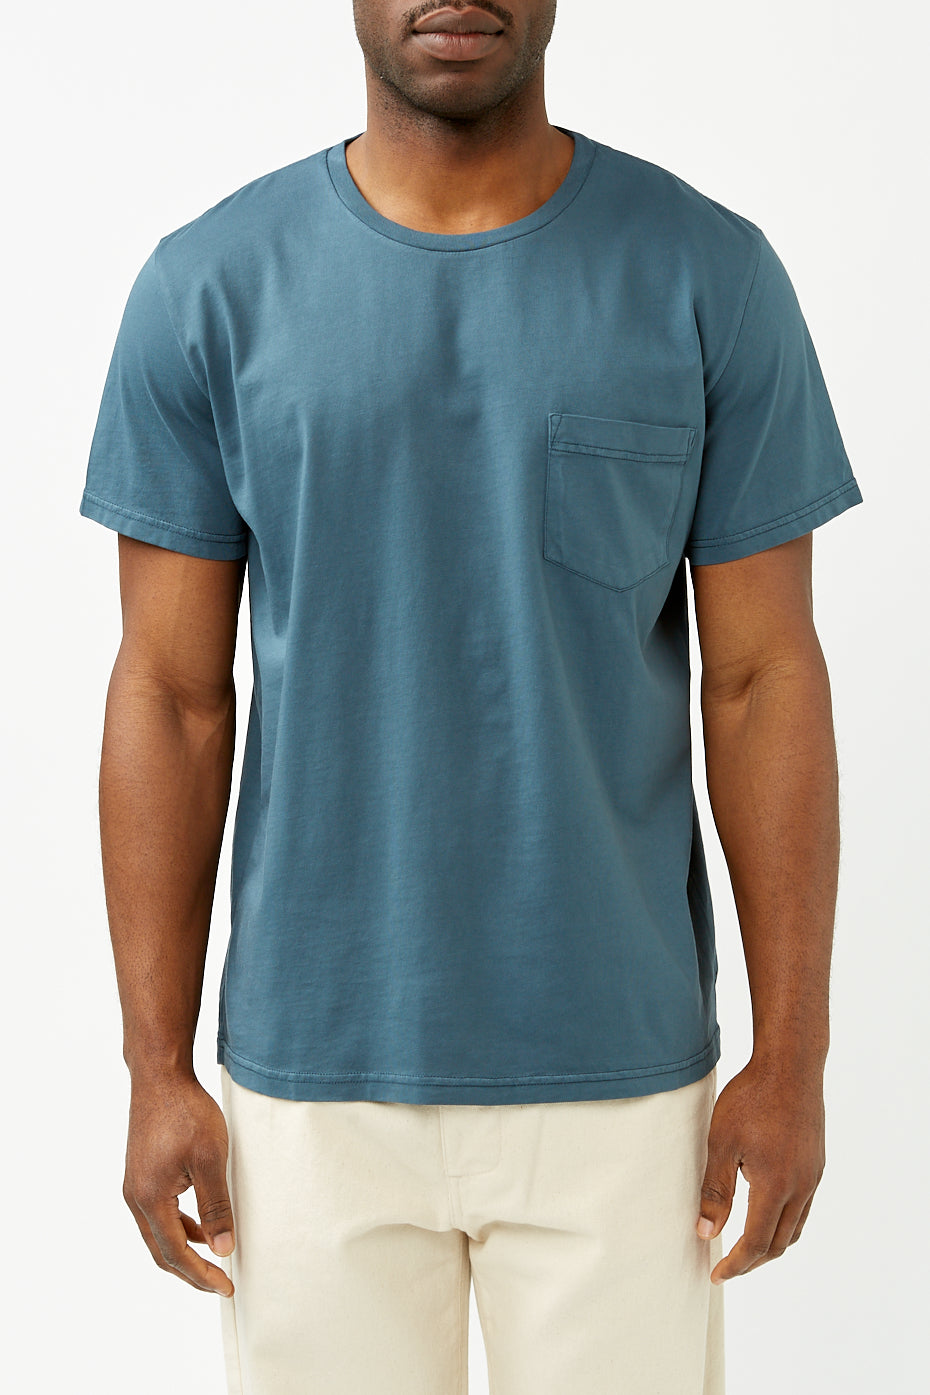 Outland Blue Welcome T-shirt